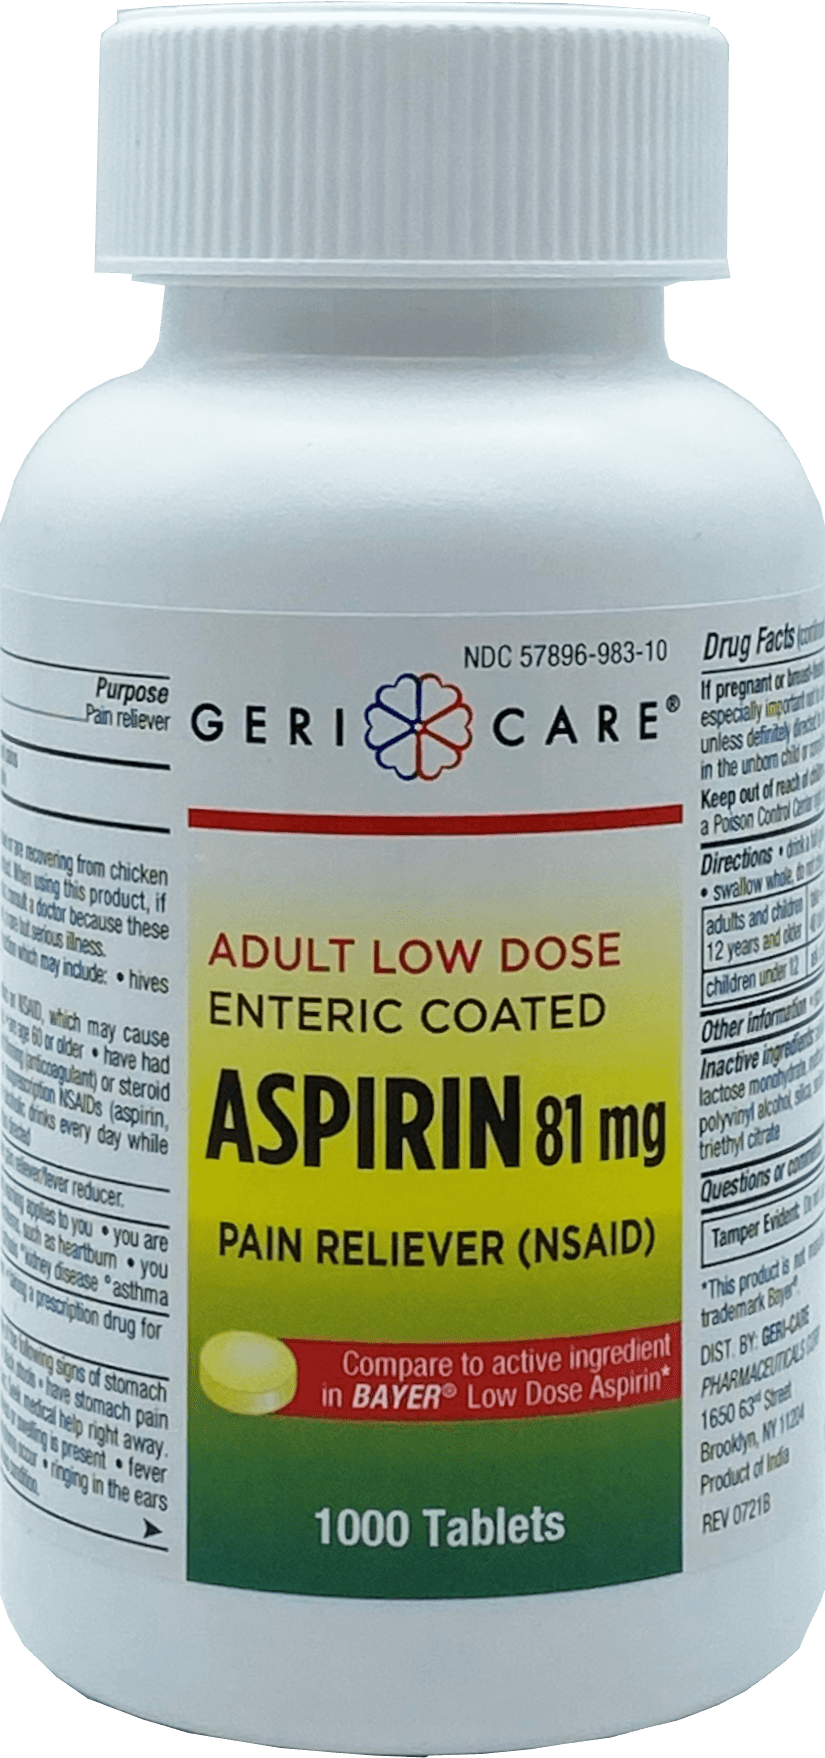 Low Dose Enteric Coated Aspirin 81mg – 1000 Tablets